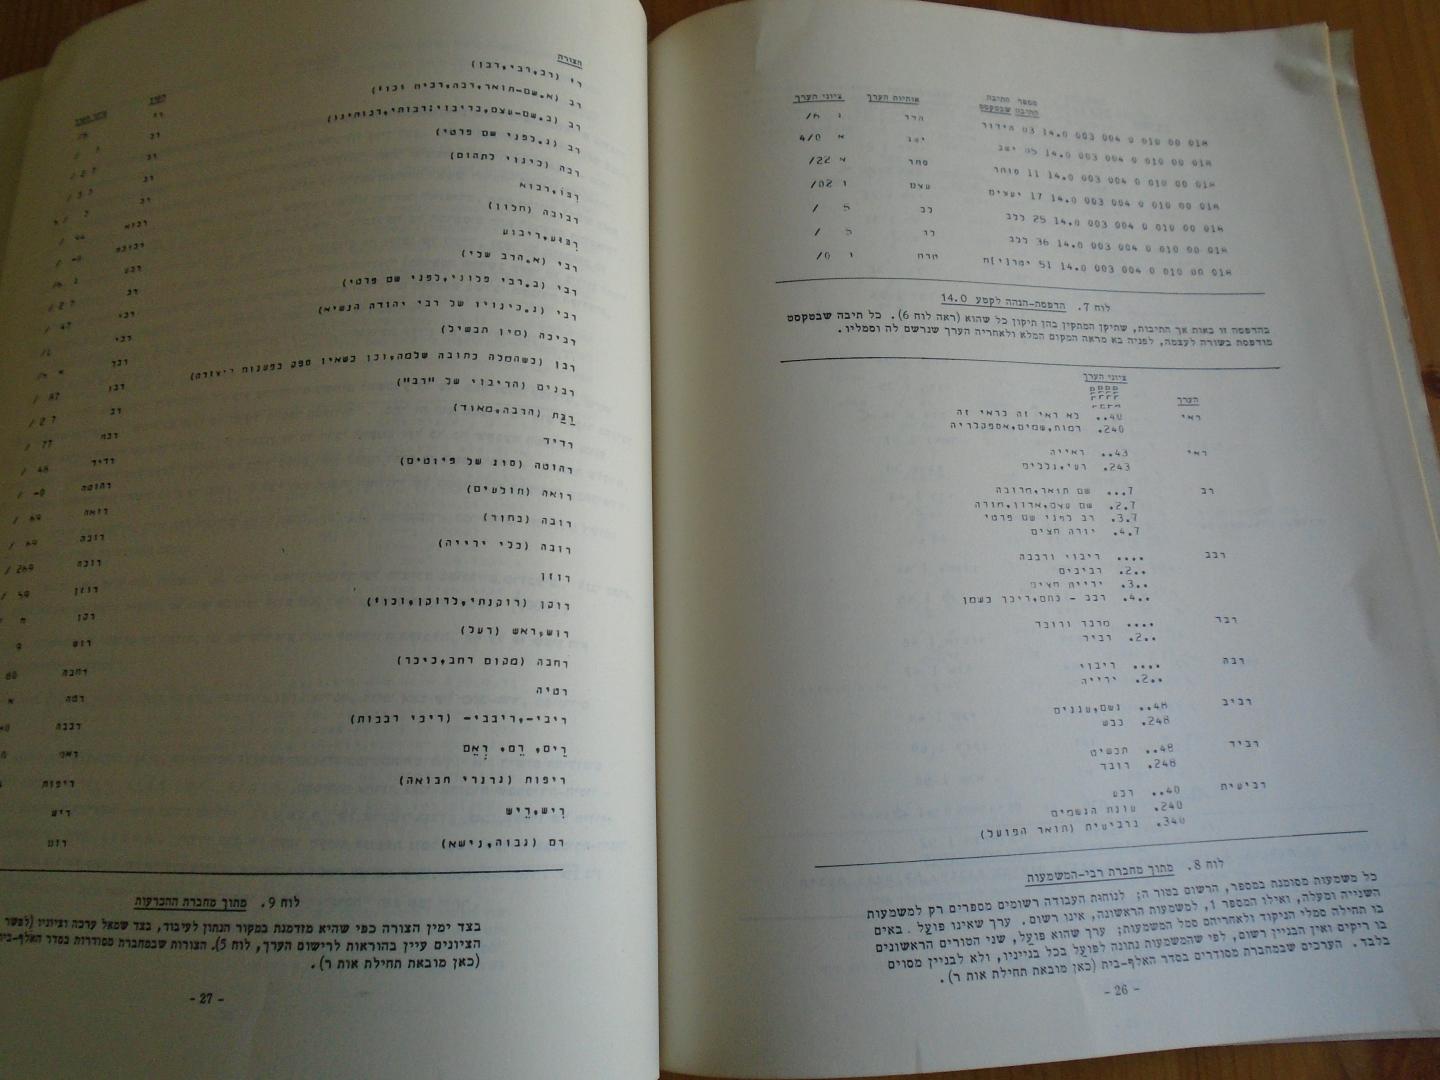  - The Historical Dictionary of the Hebrew Language